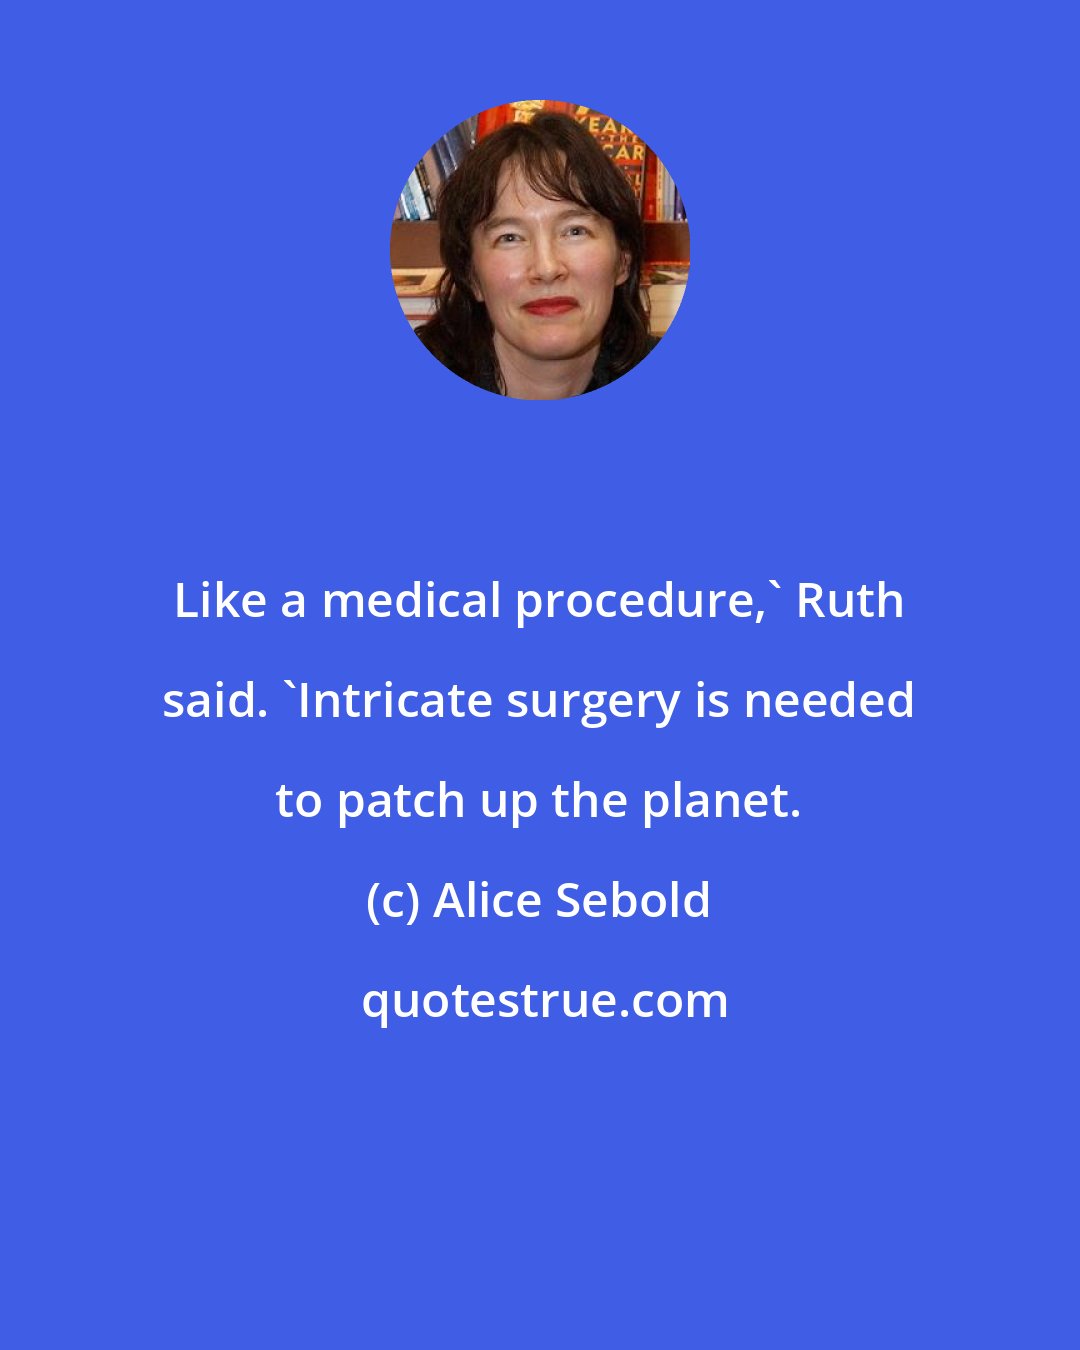 Alice Sebold: Like a medical procedure,' Ruth said. 'Intricate surgery is needed to patch up the planet.